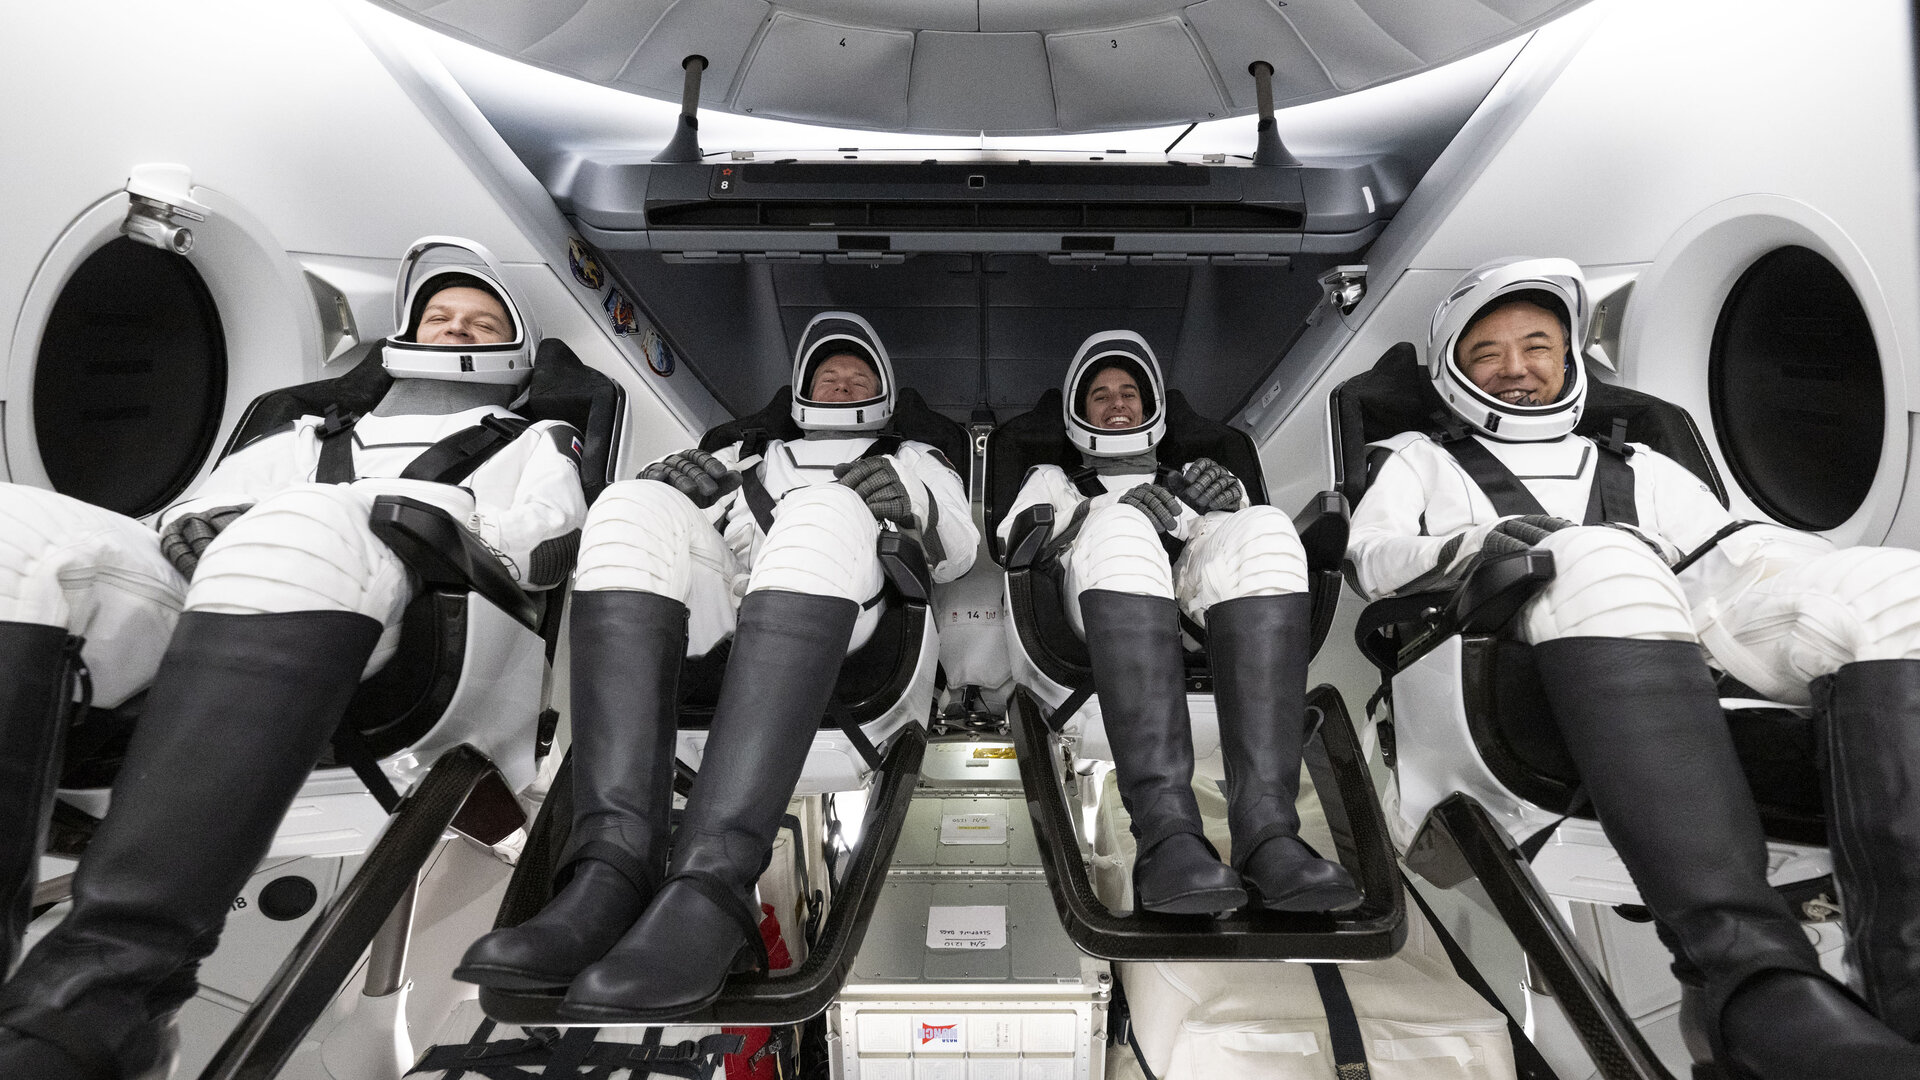 Andreas Mogensen and Crew-7 in Dragon after return to Earth